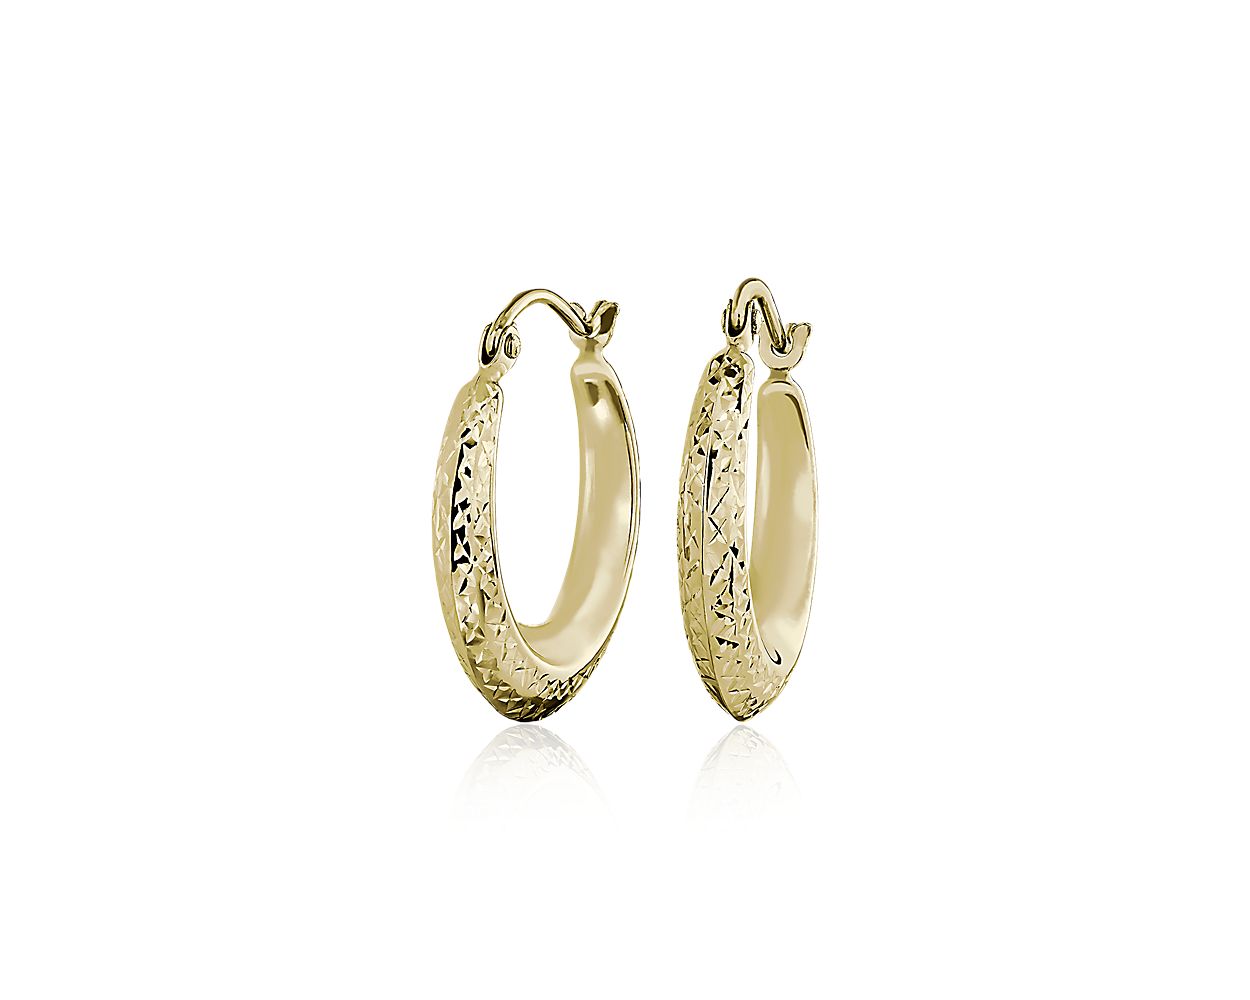 Small Gold Hoop Earrings Designs For Daily Use With Price 2024 : बेस्ट  स्माल गोल्ड हूप इयररिंग डिजाइन